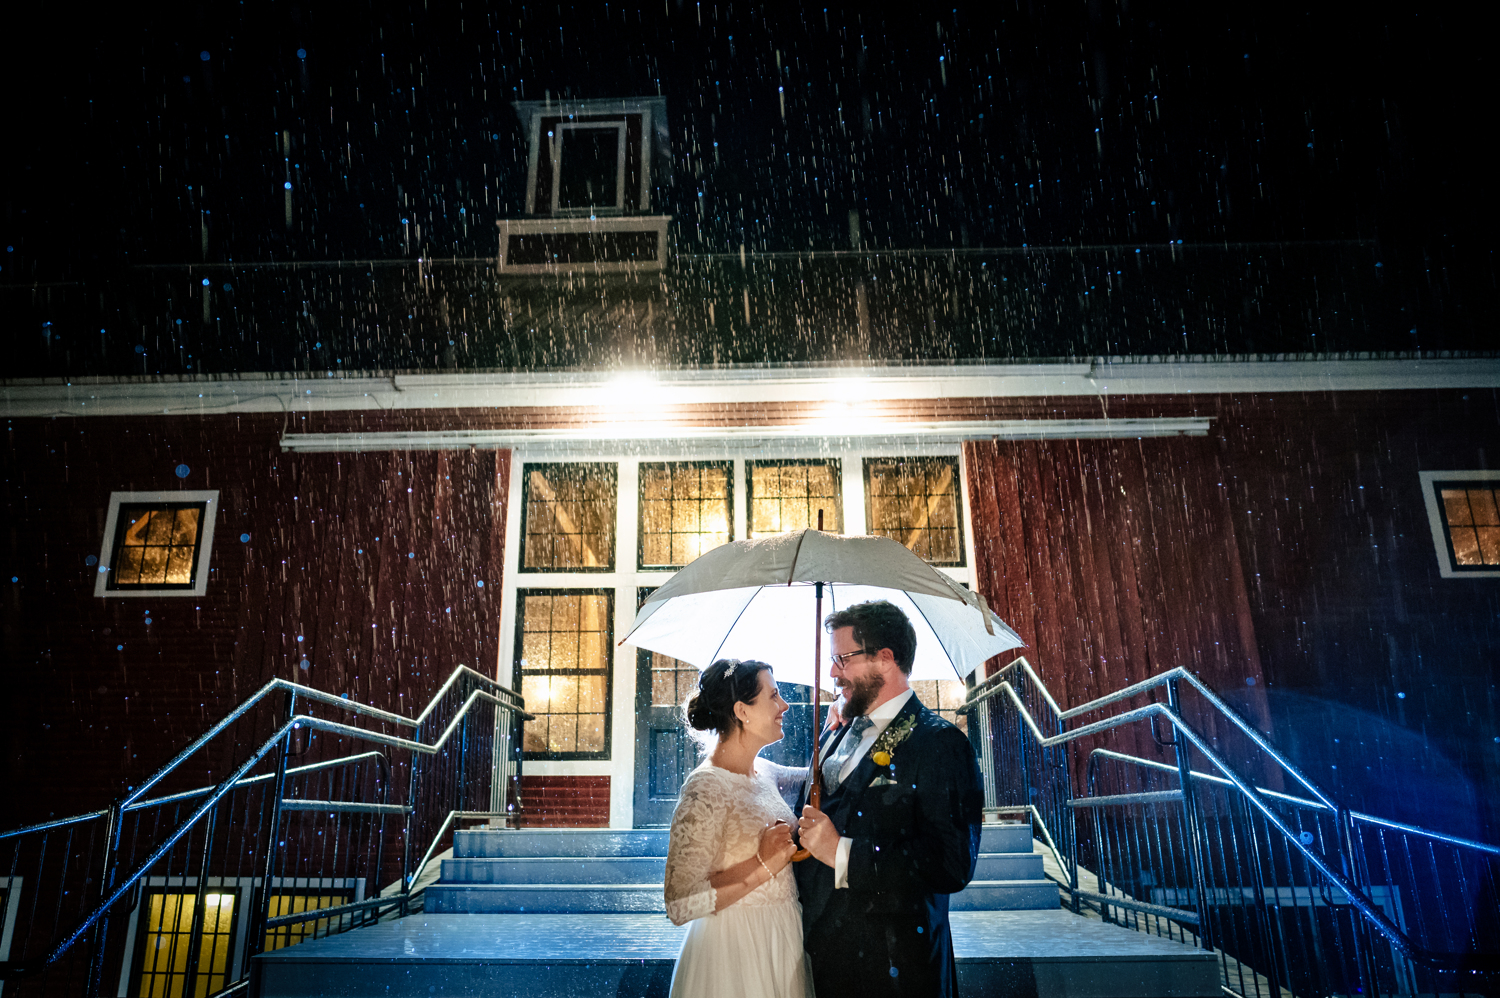 Anne and Jed standing and holding an umbrella in the rain in front of their wedding barn.